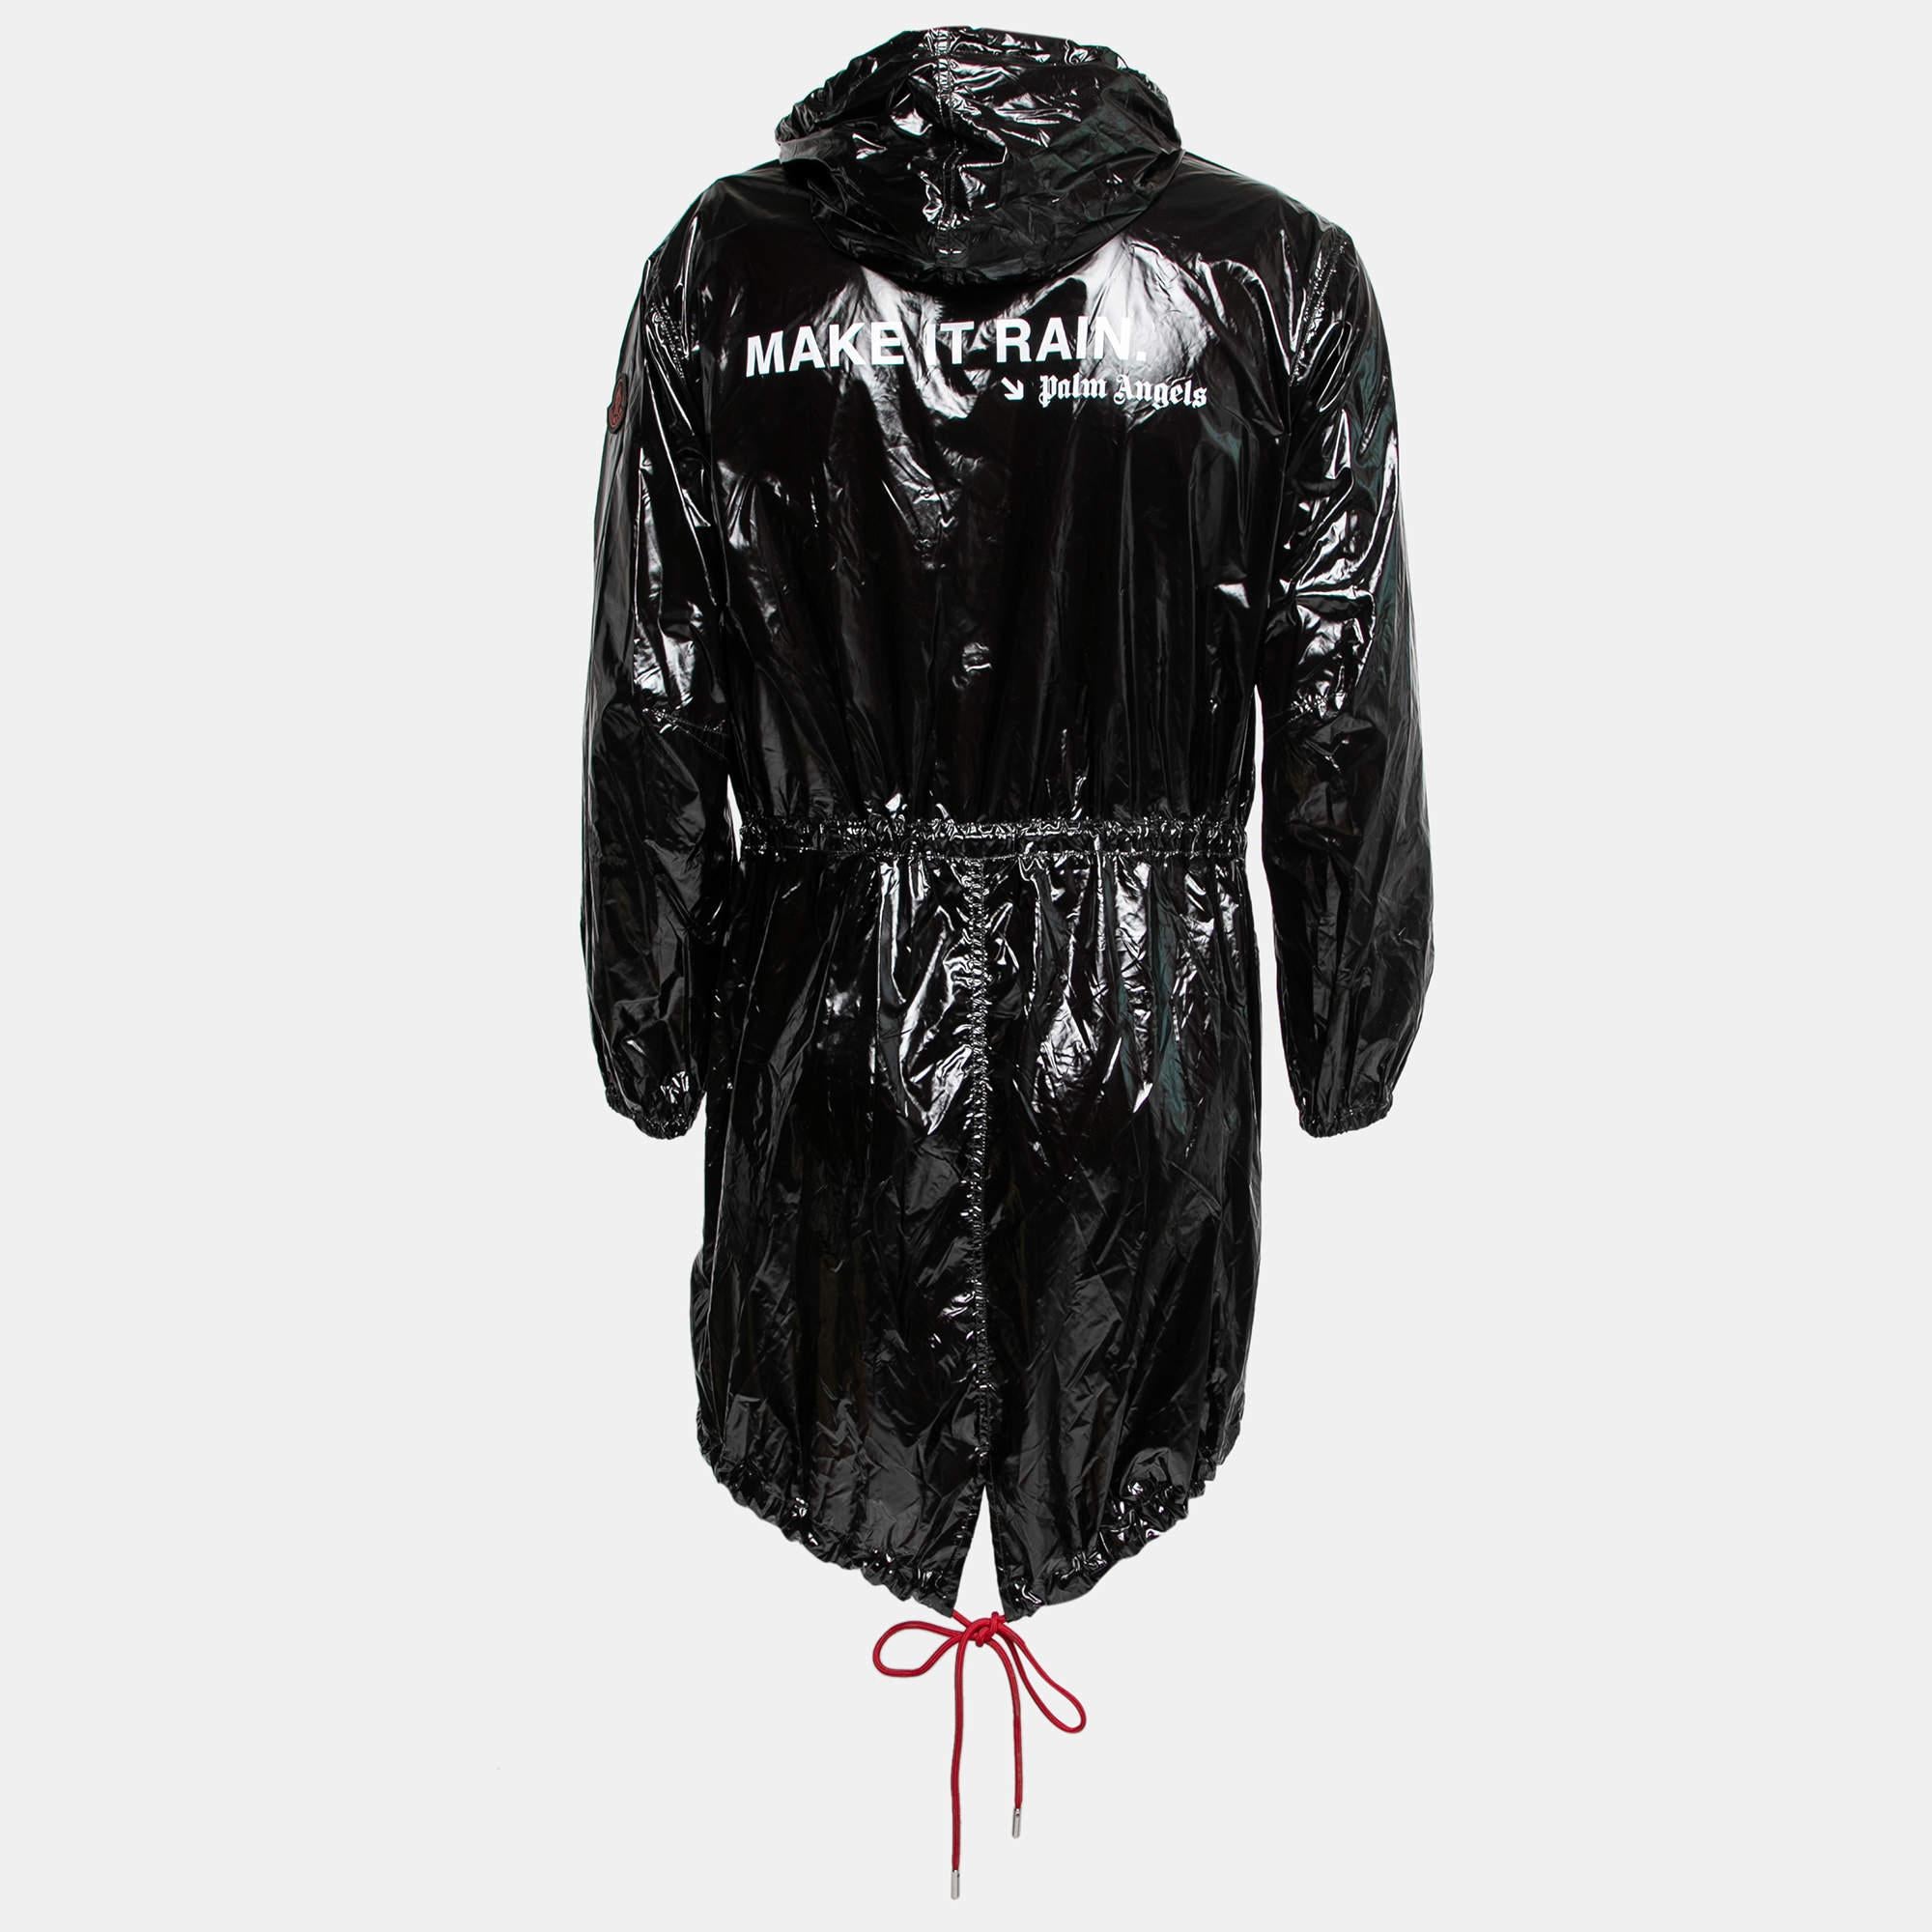 Moncler x Palm Angels bring to you this comfy parka that oozes style. It features a black color and has a hoodie as well as external pockets. Created from fine materials, the long-sleeved piece is exactly what you need for those busy, rainy